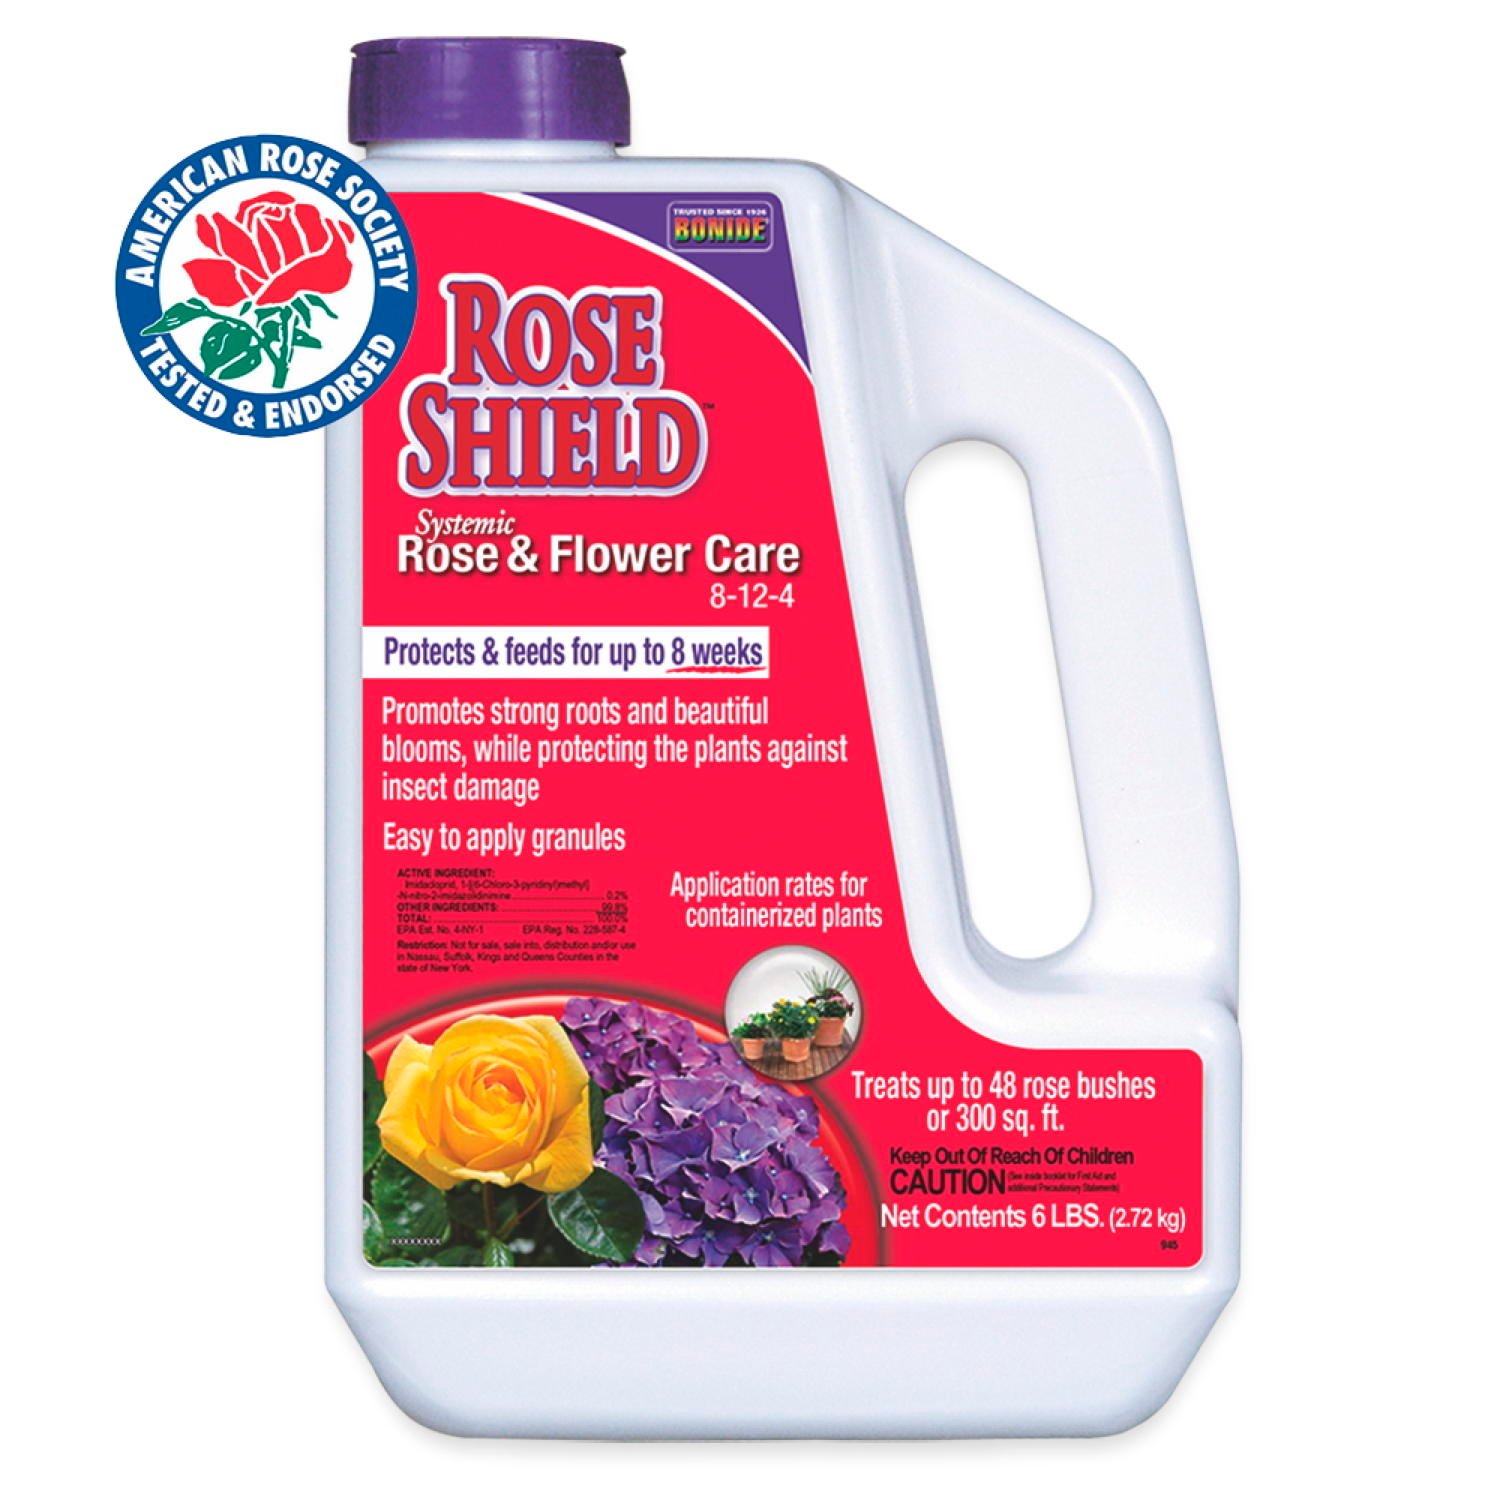 Bonide Ready-To-Use Rose Shield Systemic Rose & Flower Care, 6 lbs. - 946